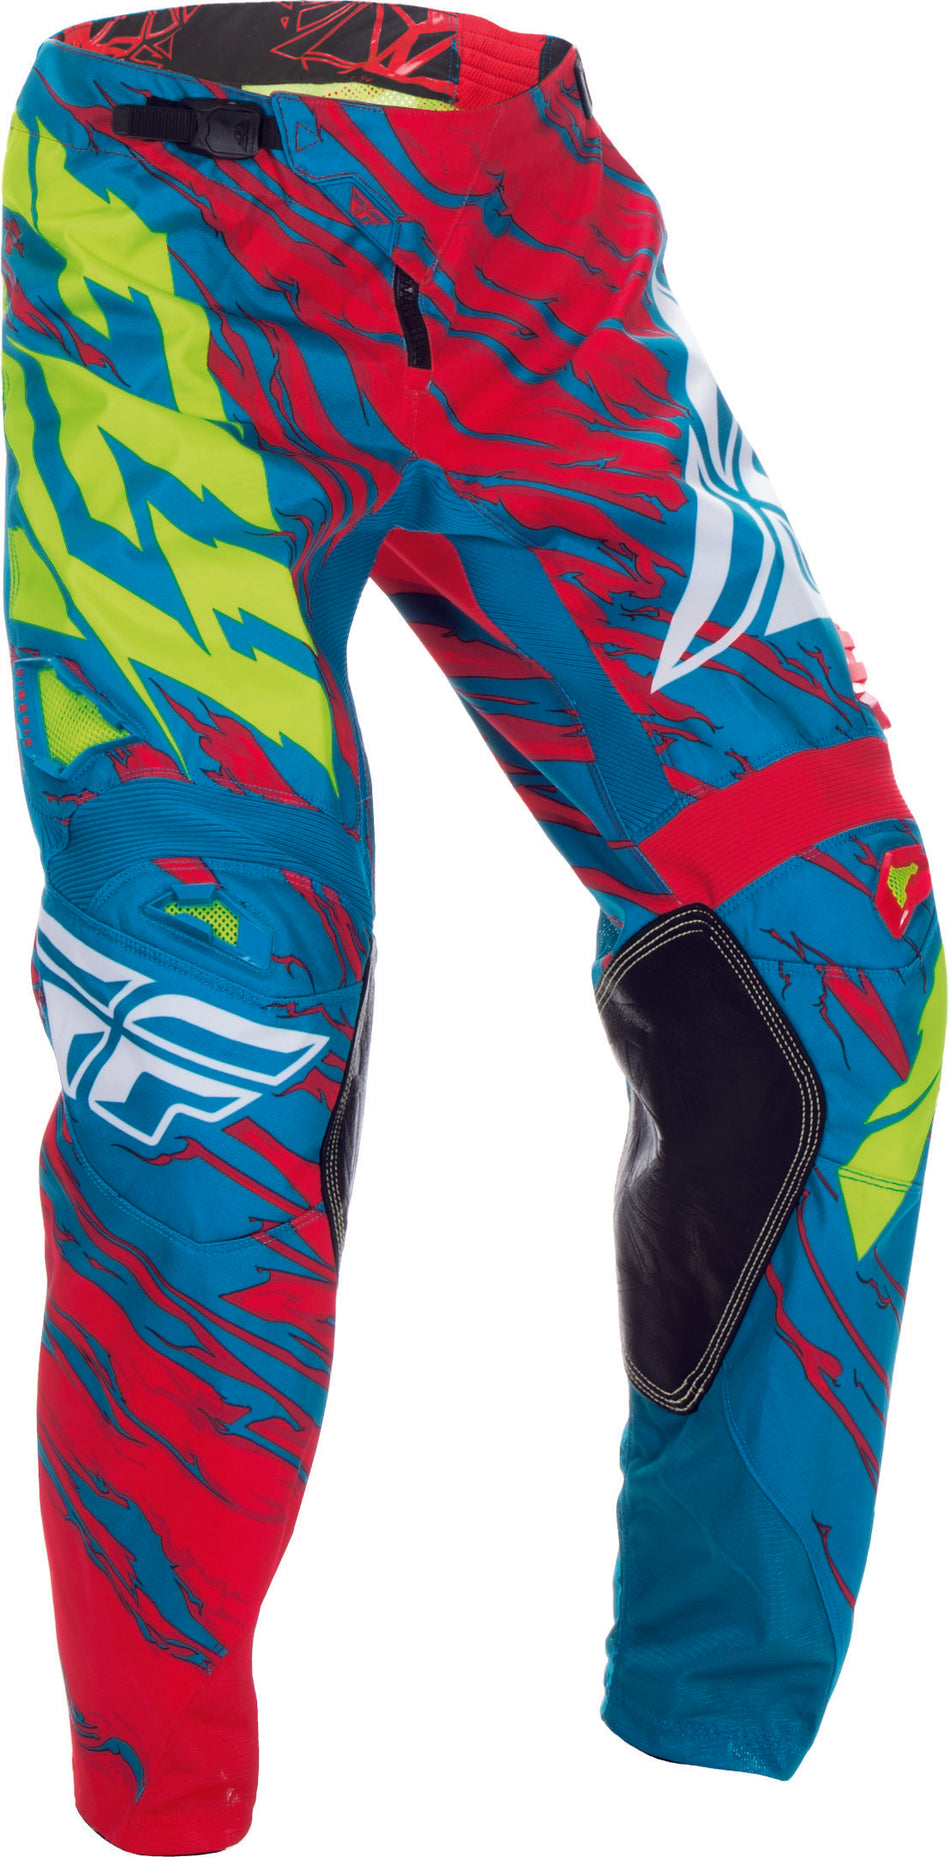 FLY RACING Kinetic Relapse Pant Teal/Red Sz 30 370-43930